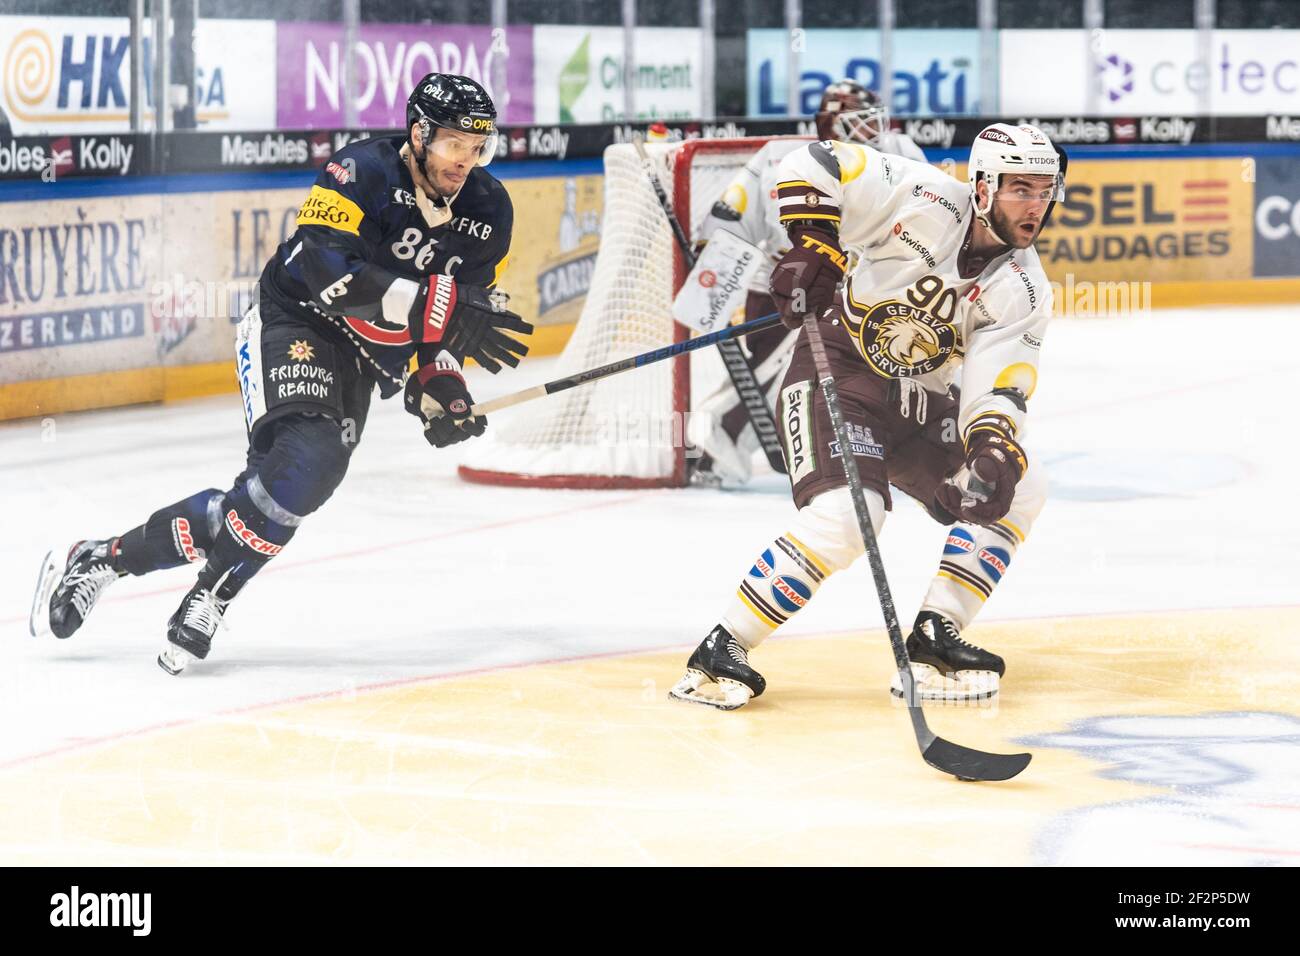 Friborg, Friborg. 12th Mar, 2021. March 12th, 2021, Friborg, BCF Arena, National League: Friborg-Gotteron - Geneve-Servette HC, at the puck # 90 Simon Le Coultre (Geneva) in the background # 86 Julien Sprunger (Friborg) (Switzerland/Croatia OUT) Credit: SPP Sport Press Photo. /Alamy Live News Stock Photo